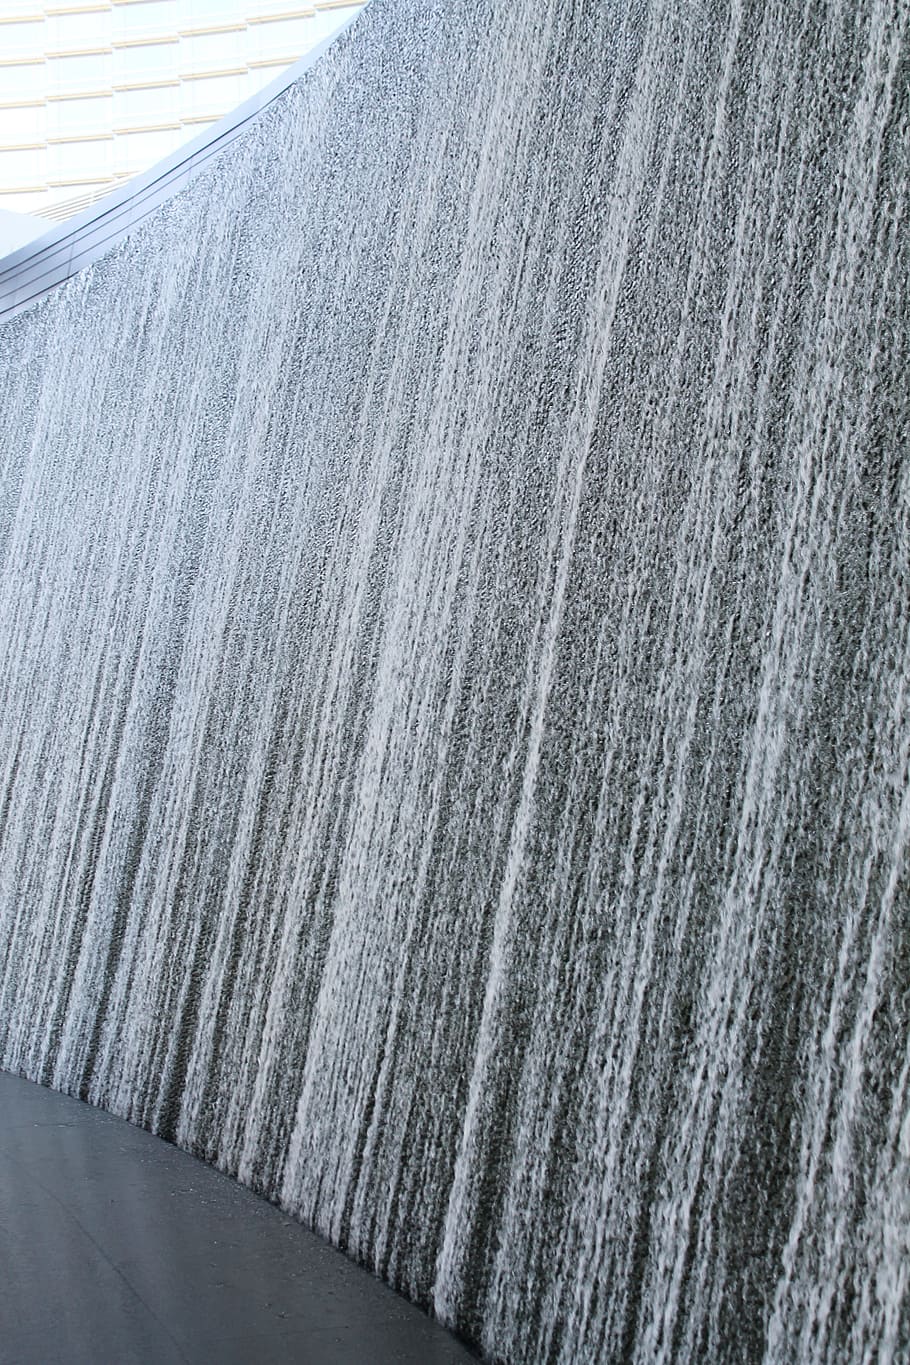 Architecture, Water Feature, Wall, water wall, waterfall, design, feature, water, industry, day